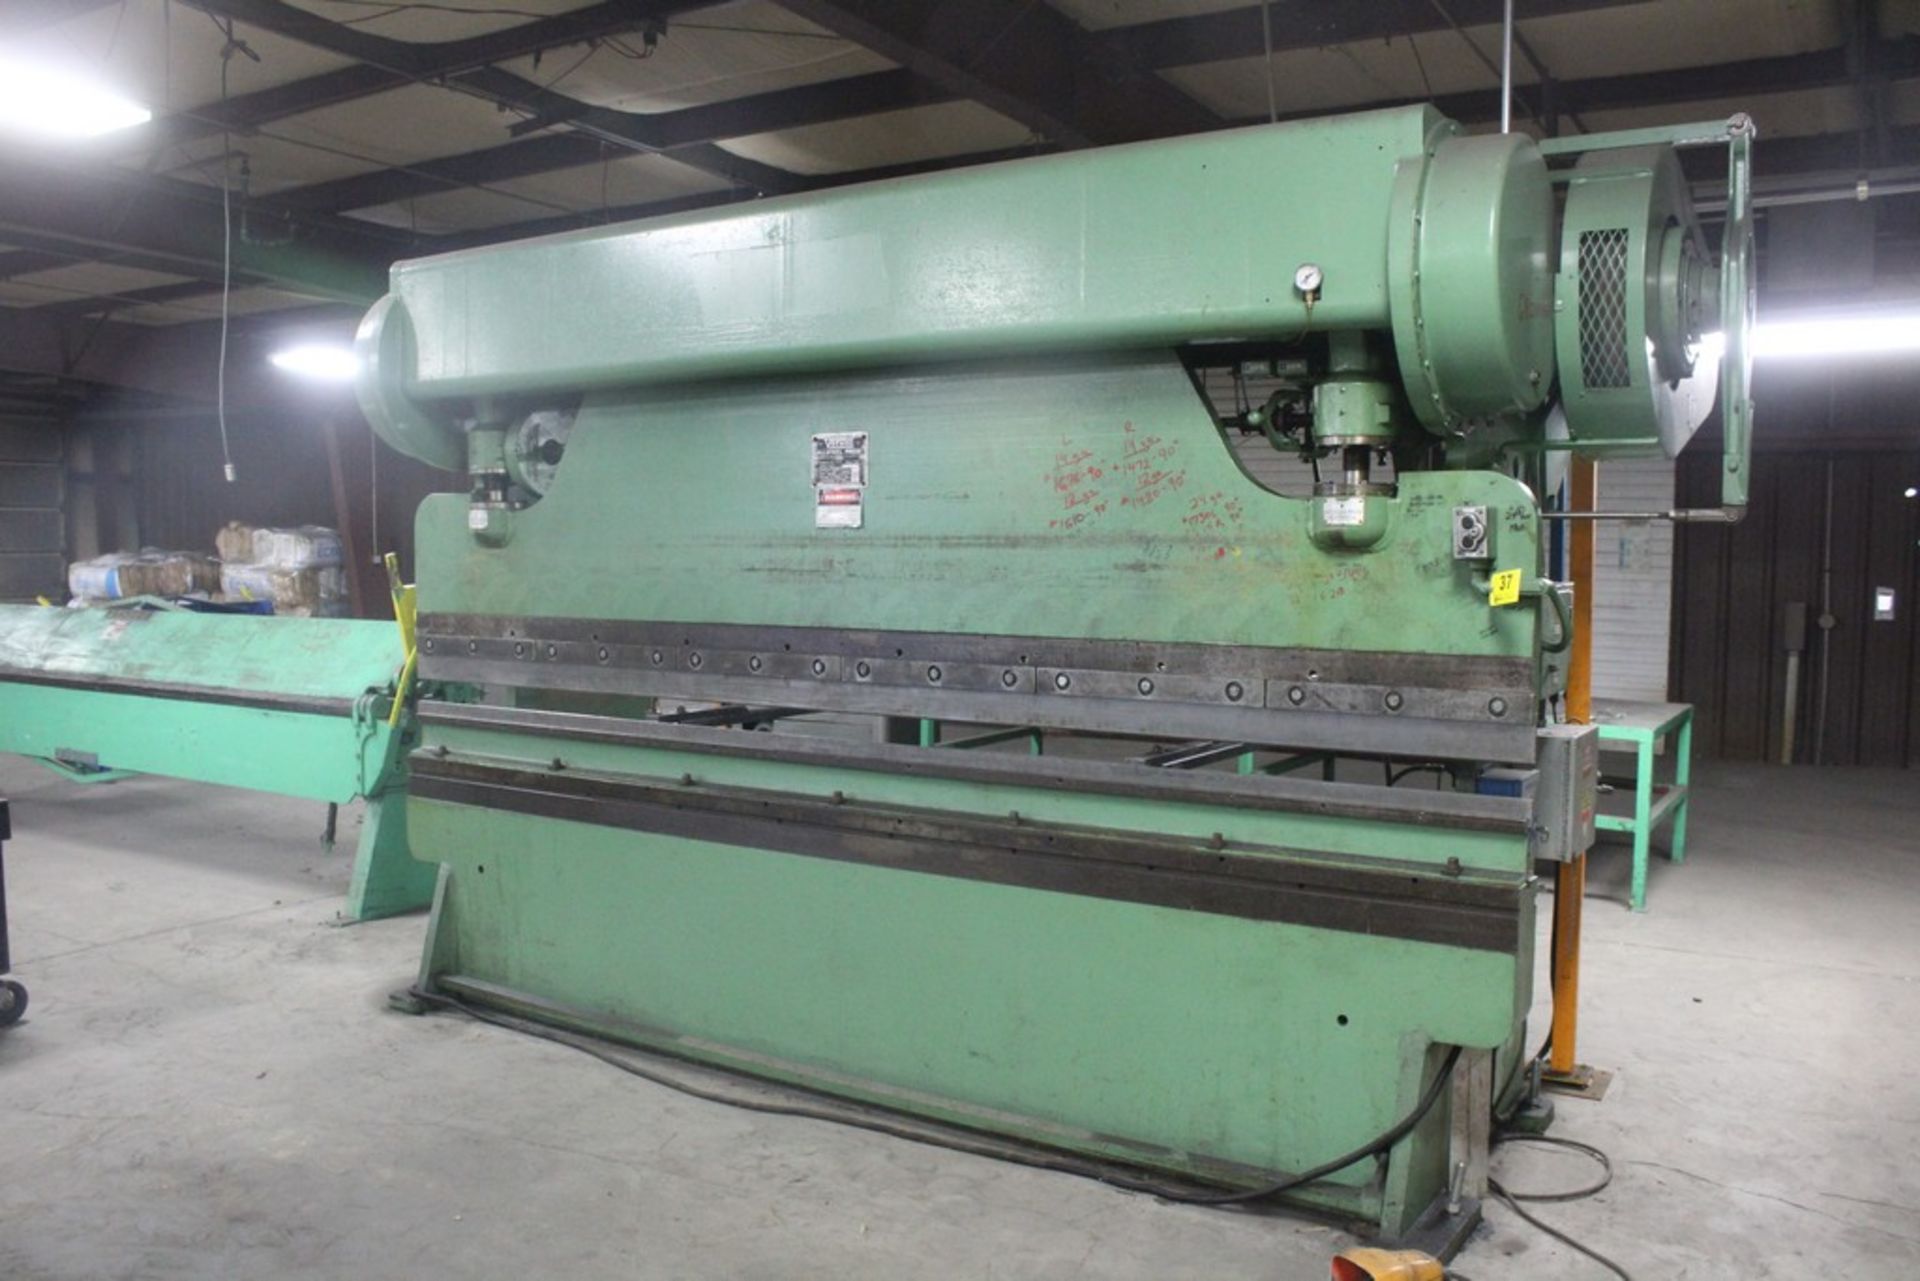 Verson Model 2010-65 Mechanical Power Press Brake, Serial Number: 20844 90 Ton - 12' Overall - Air - Image 2 of 7